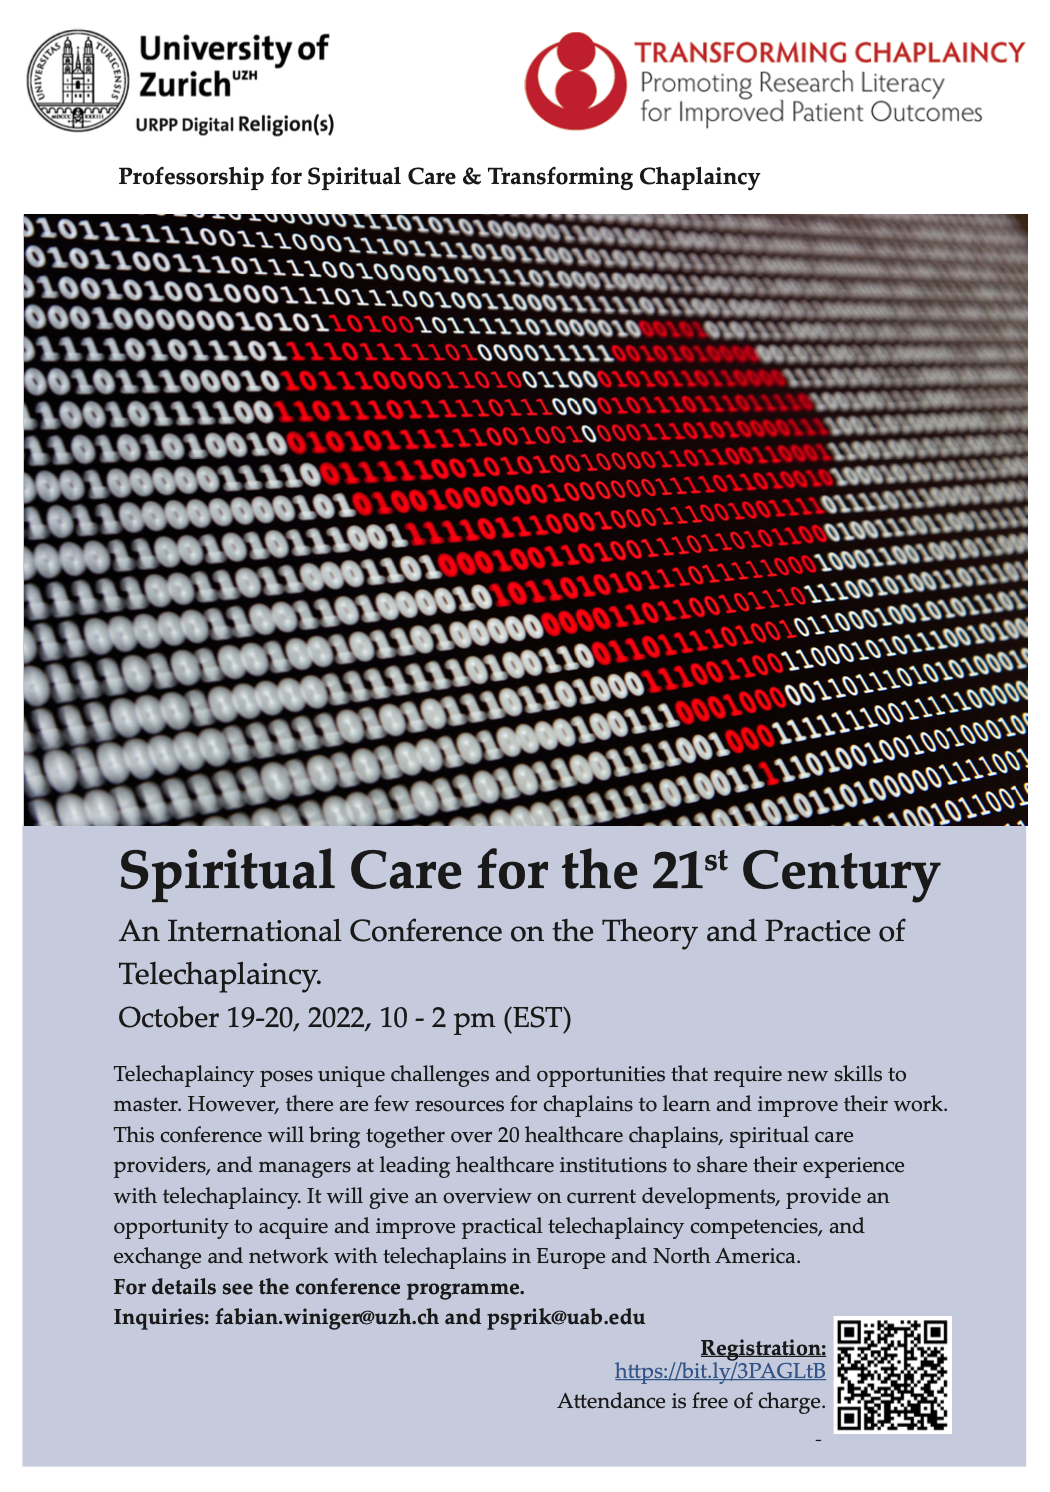 Spiritual Care for the 21st Century